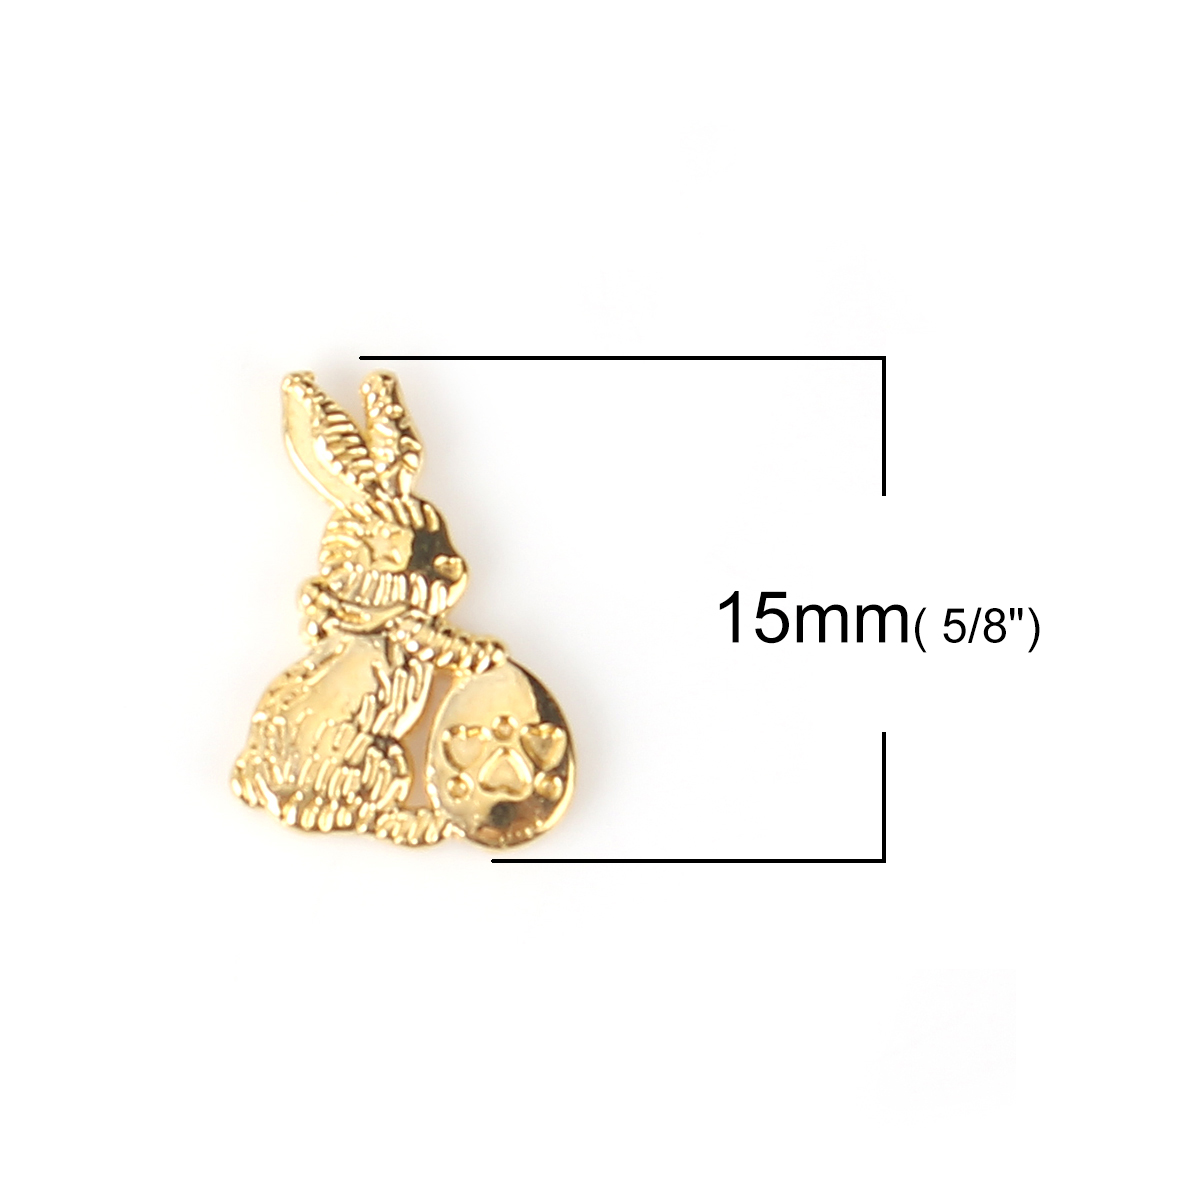 Picture of Zinc Based Alloy Resin Jewelry Tools Rabbit Animal Gold Plated 15mm( 5/8") x 11mm( 3/8"), 20 PCs